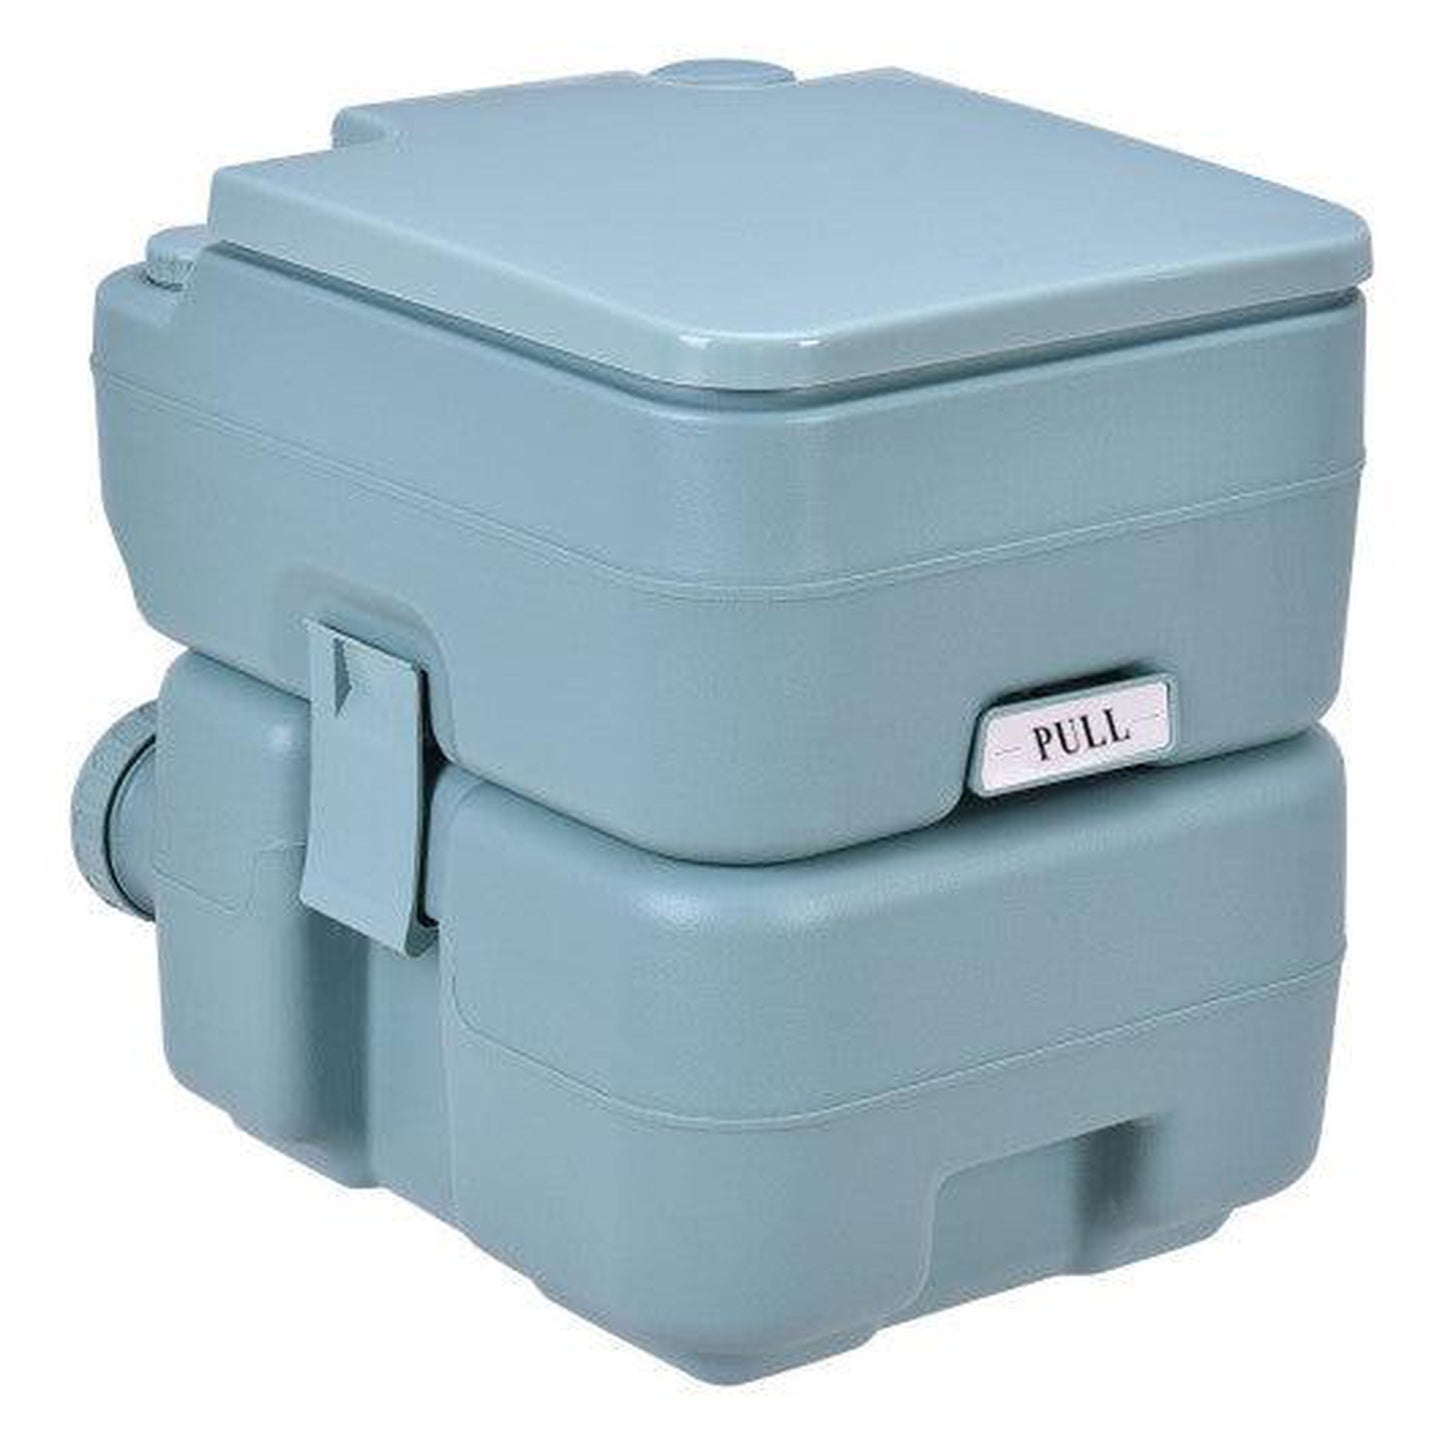 Costway 5 Gallon Green 20 L Outdoor / Indoor Potty Commode Portable Flush Toilet